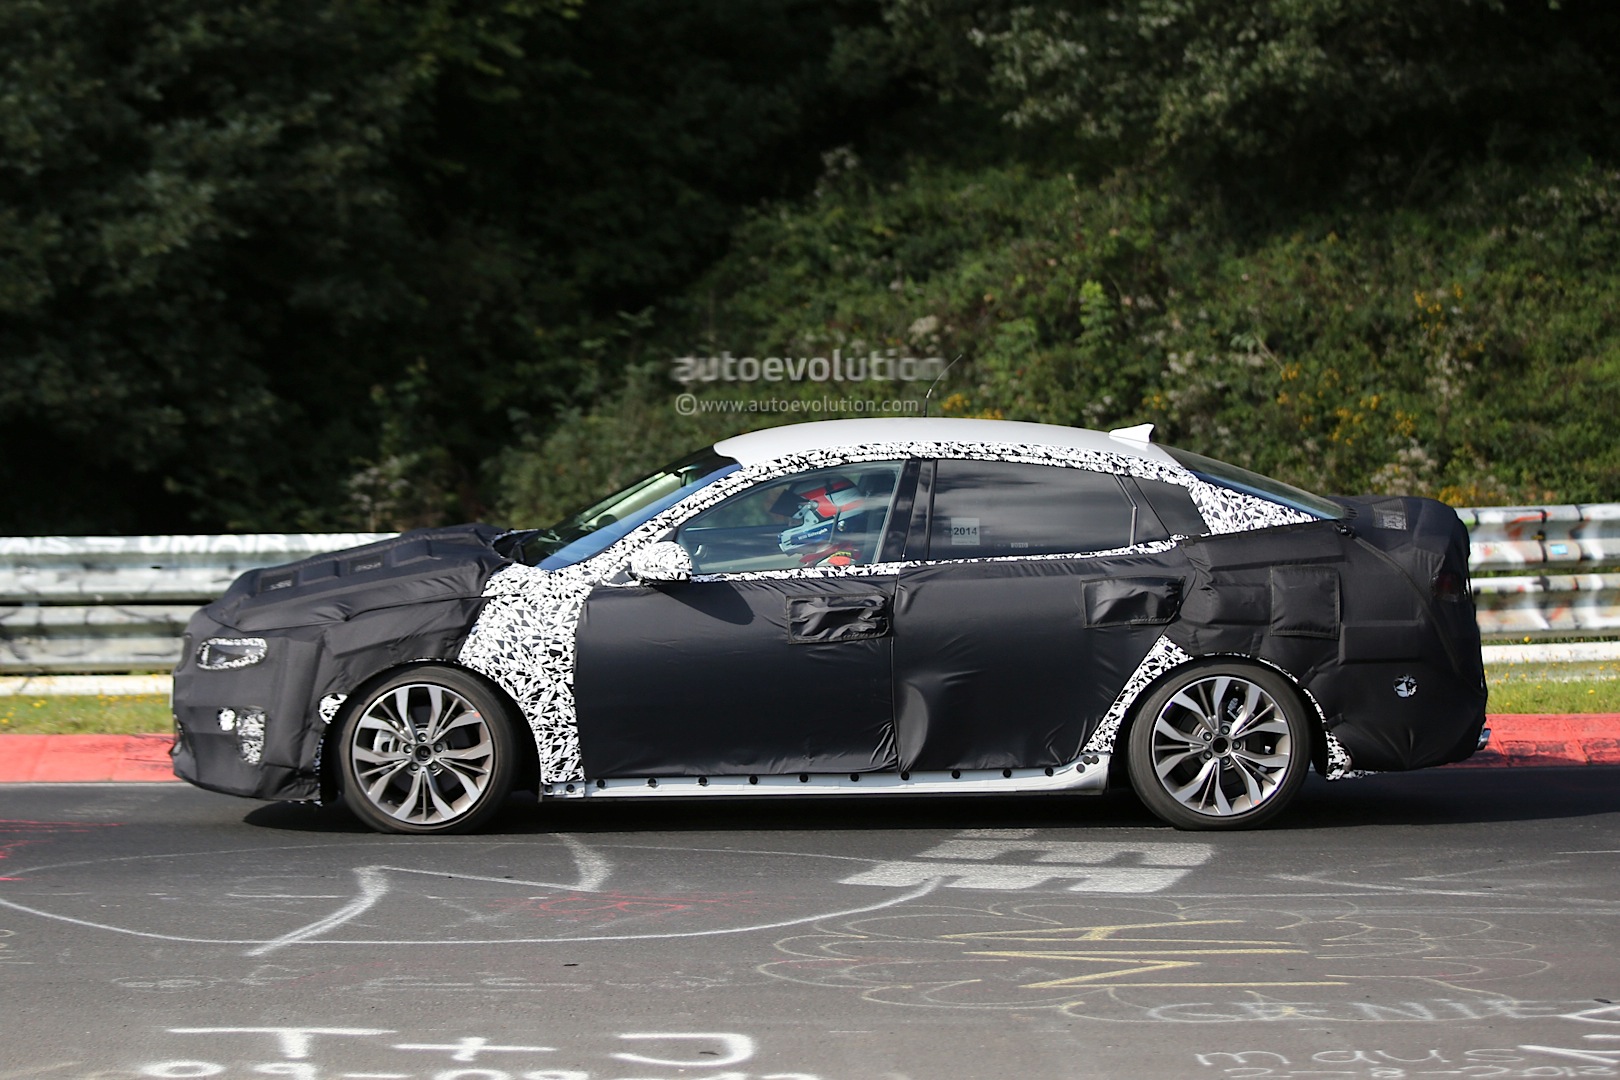 all-new-2016-kia-optima-spied-for-the-first-time-including-the-interior_10